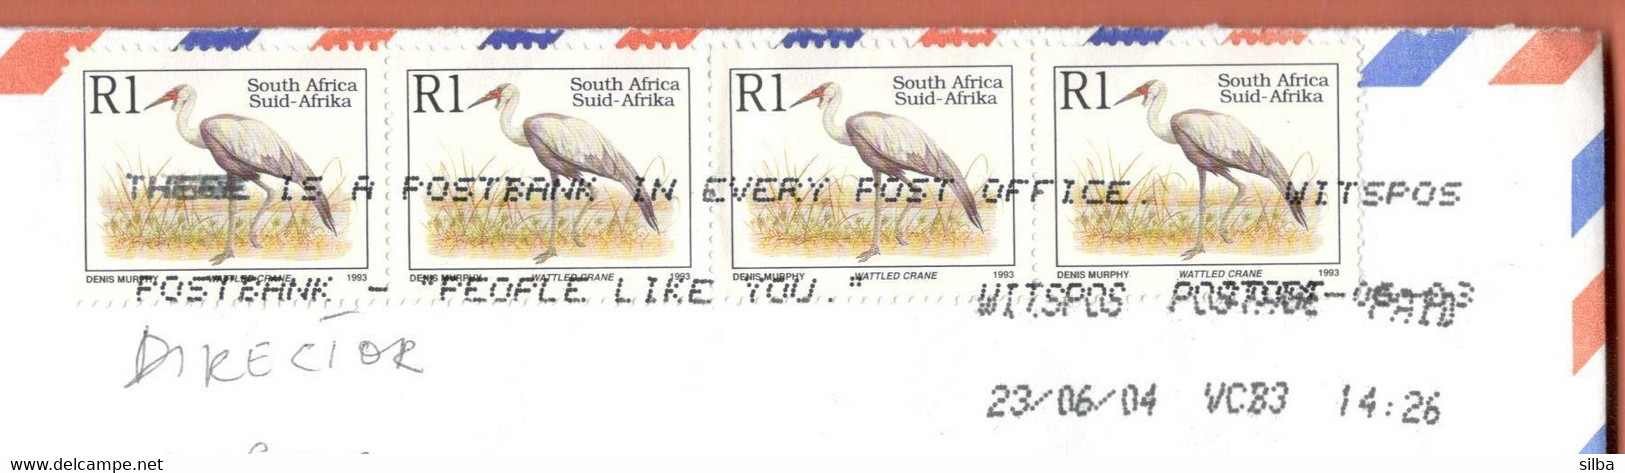 South Africa Witspos 2004 / There Is A Postbank In Every Post Office / Machine Stamp Slogan / Bird Wattled Crane 1993 - Storia Postale